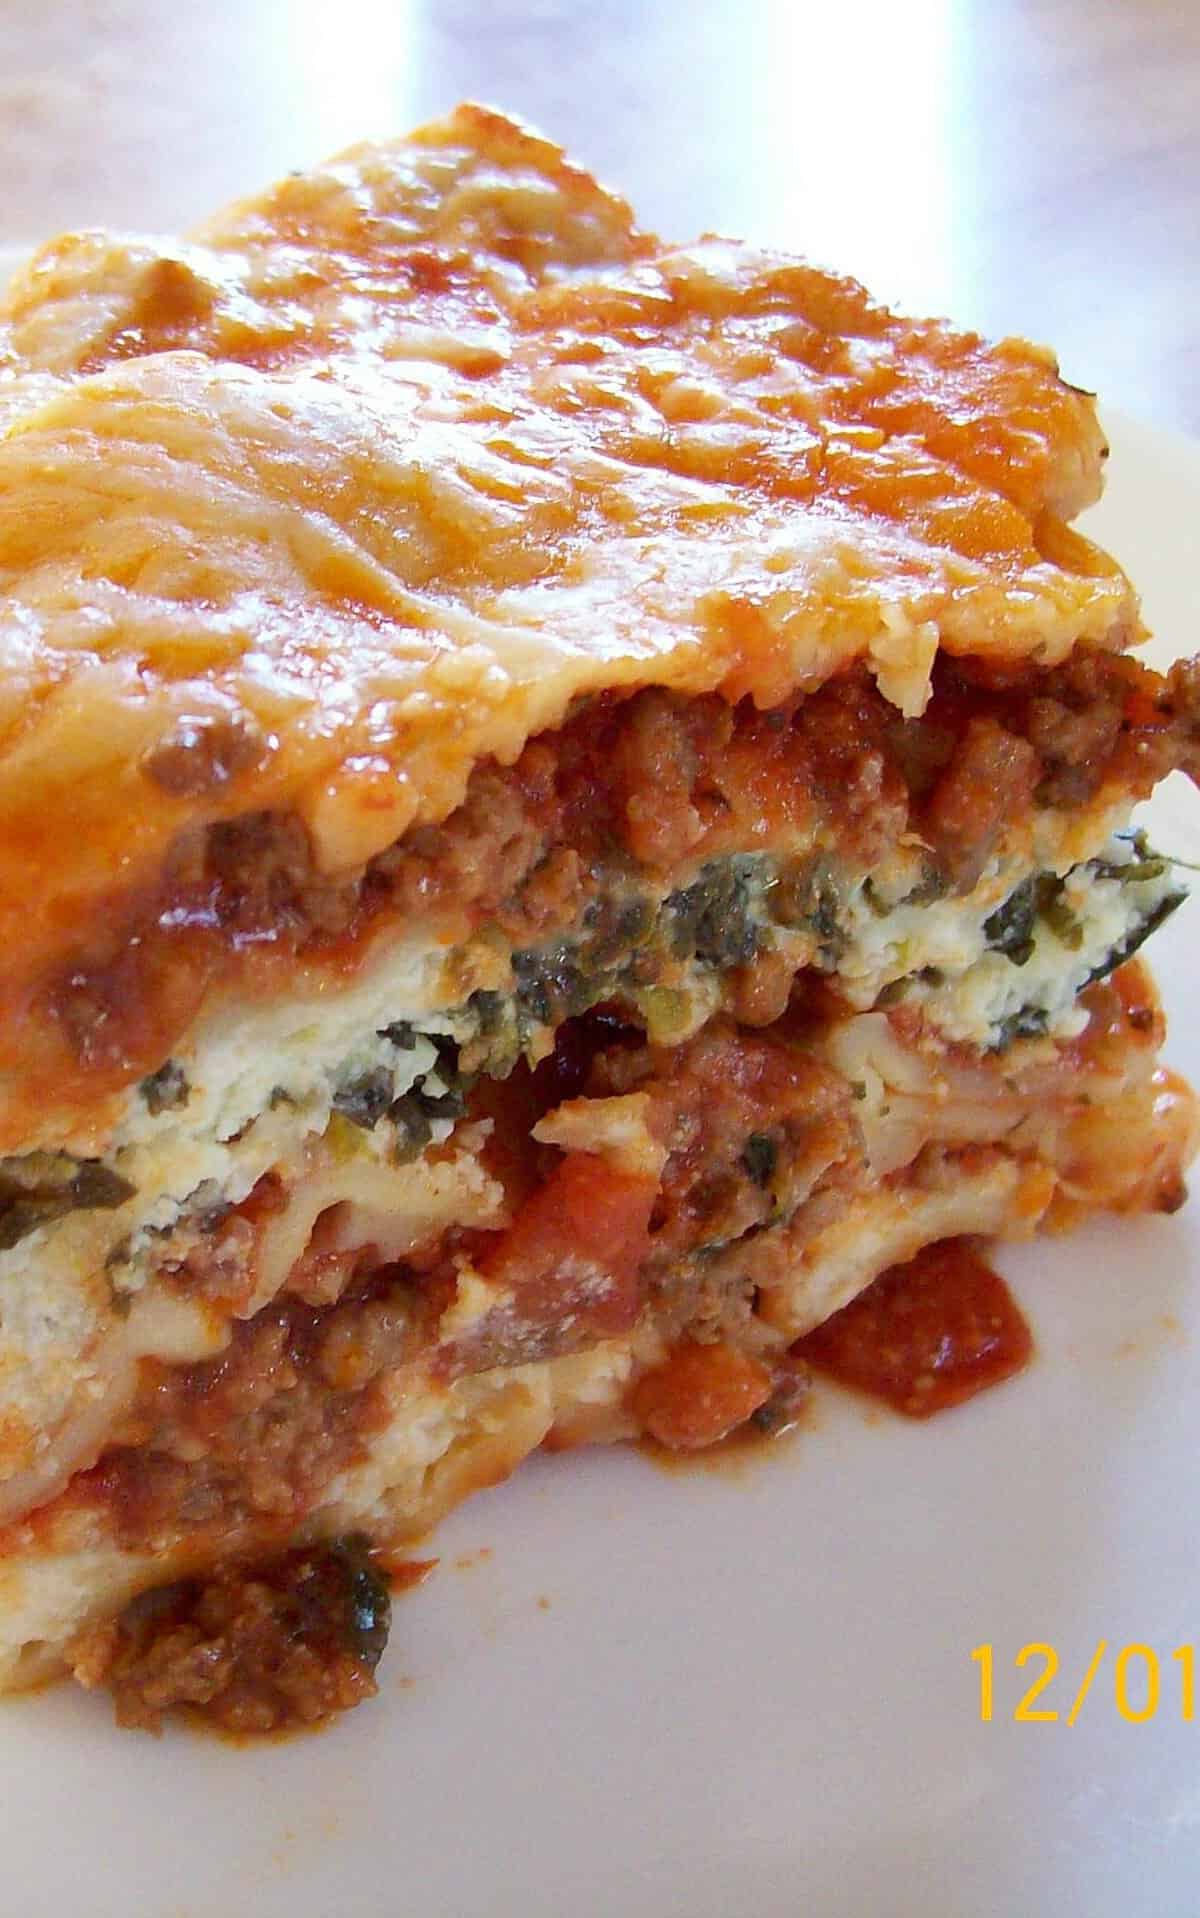  Bite into layers of cheesy goodness with our Perfectly Easy Lasagna.